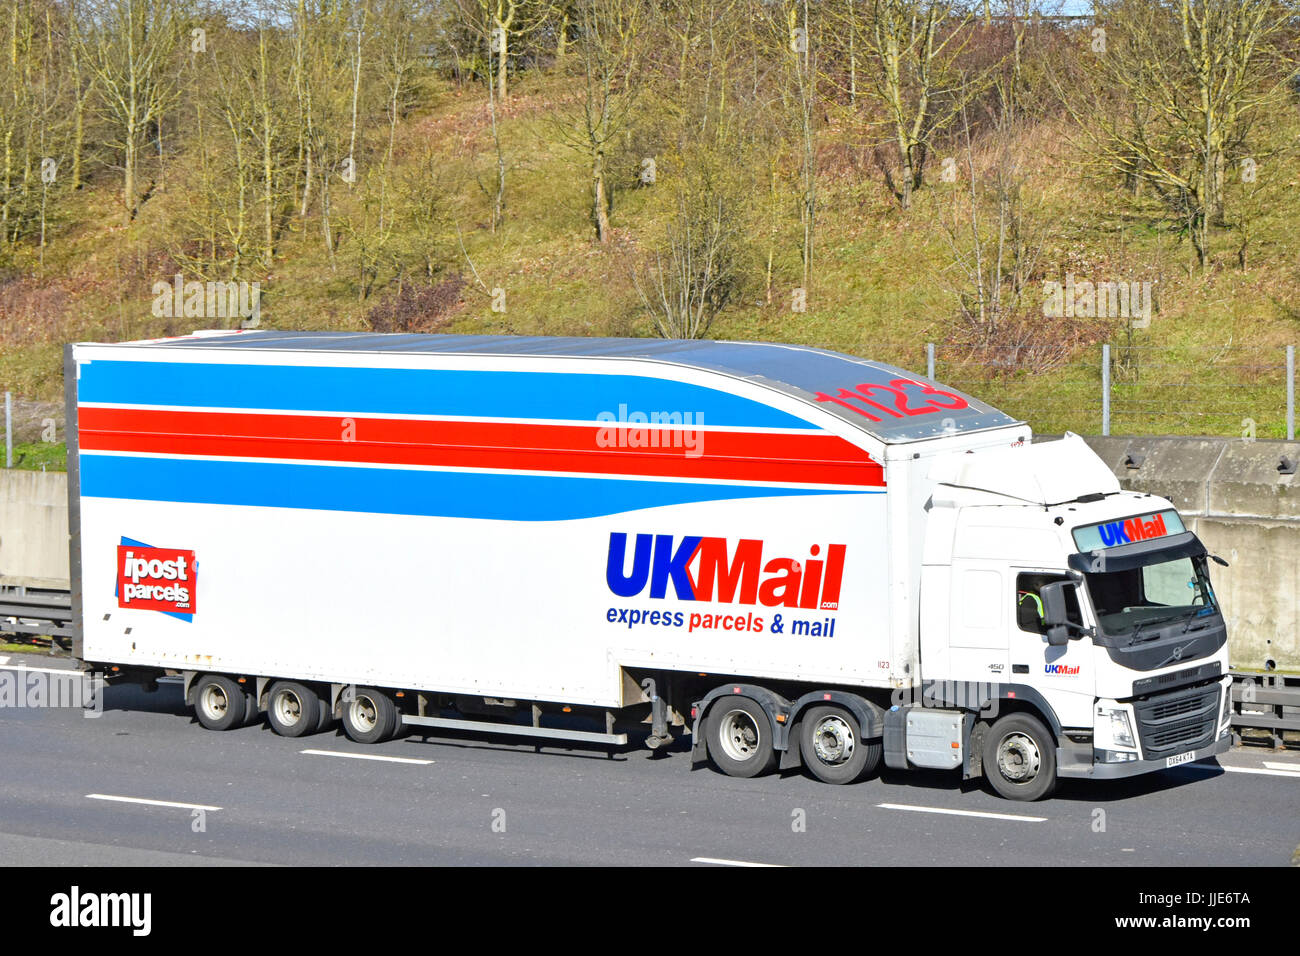 UKMail express parcels & mail logistics articulated trailer & hgv truck lorry driving along English motorway Essex England UK includes advert for ipost Stock Photo